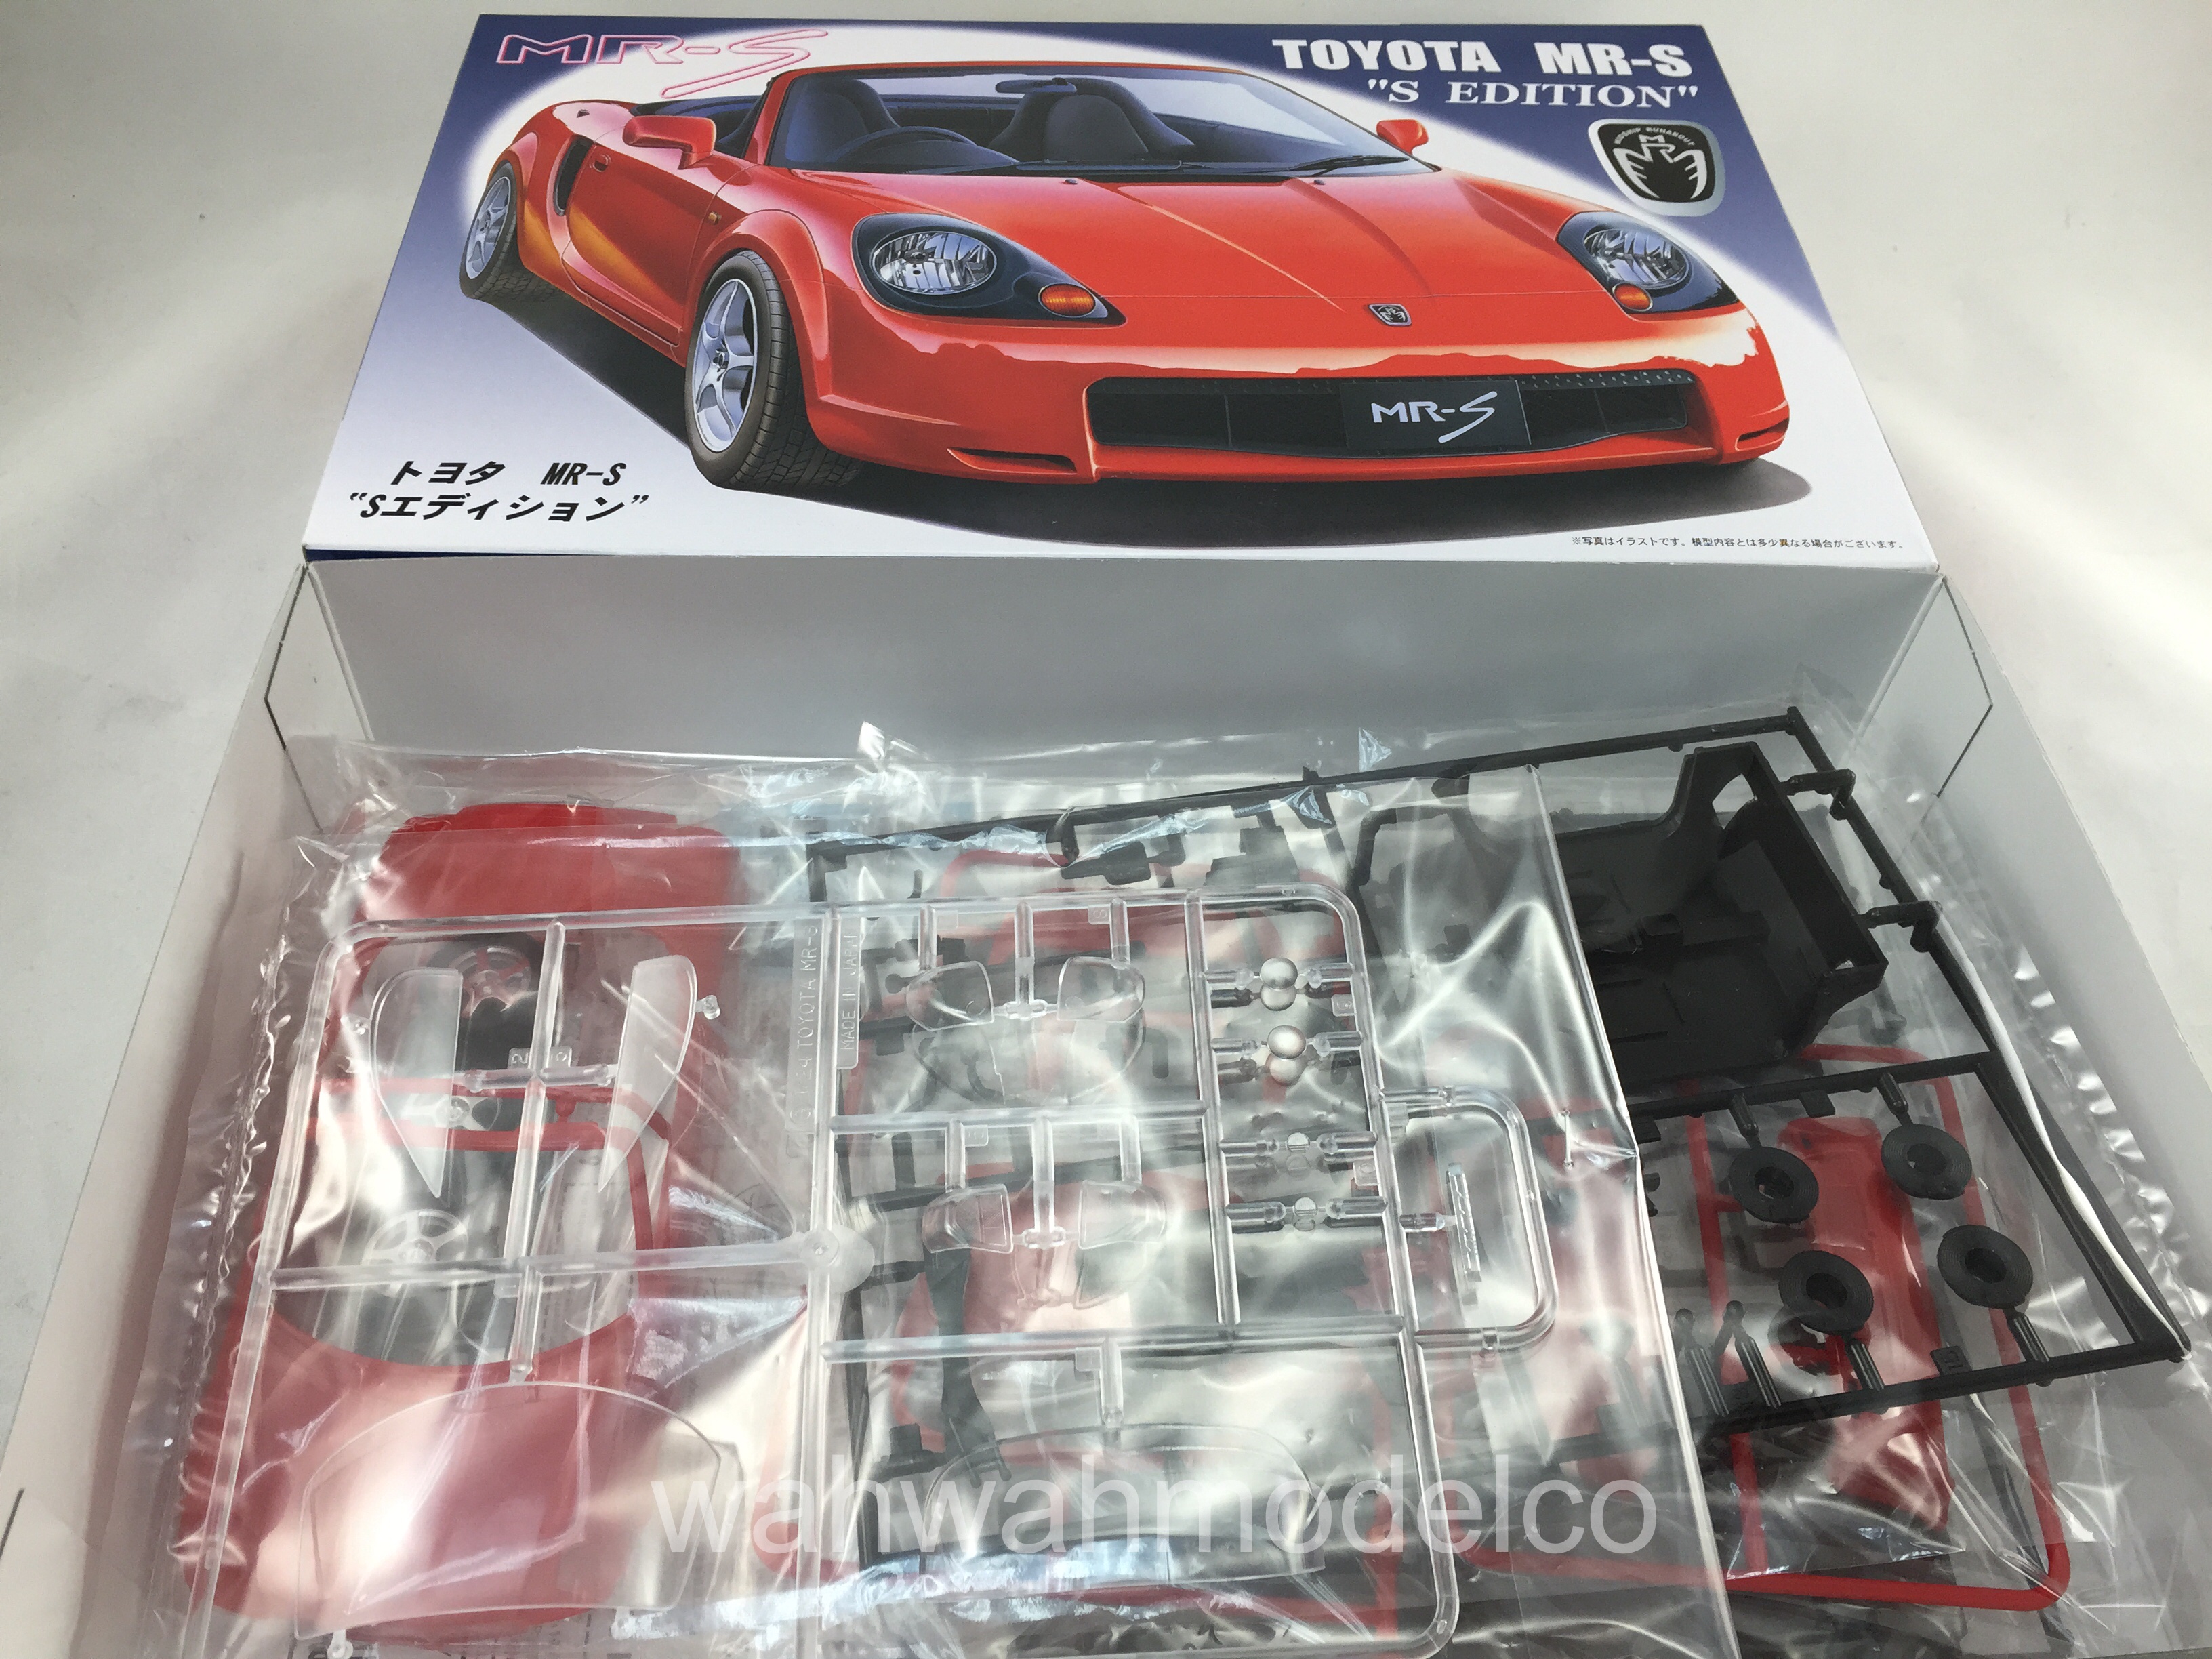 Fujimi ID-37 Toyota MR-S S Edition 1/24 Scale Kit F/S w/Tracking# New from Japan